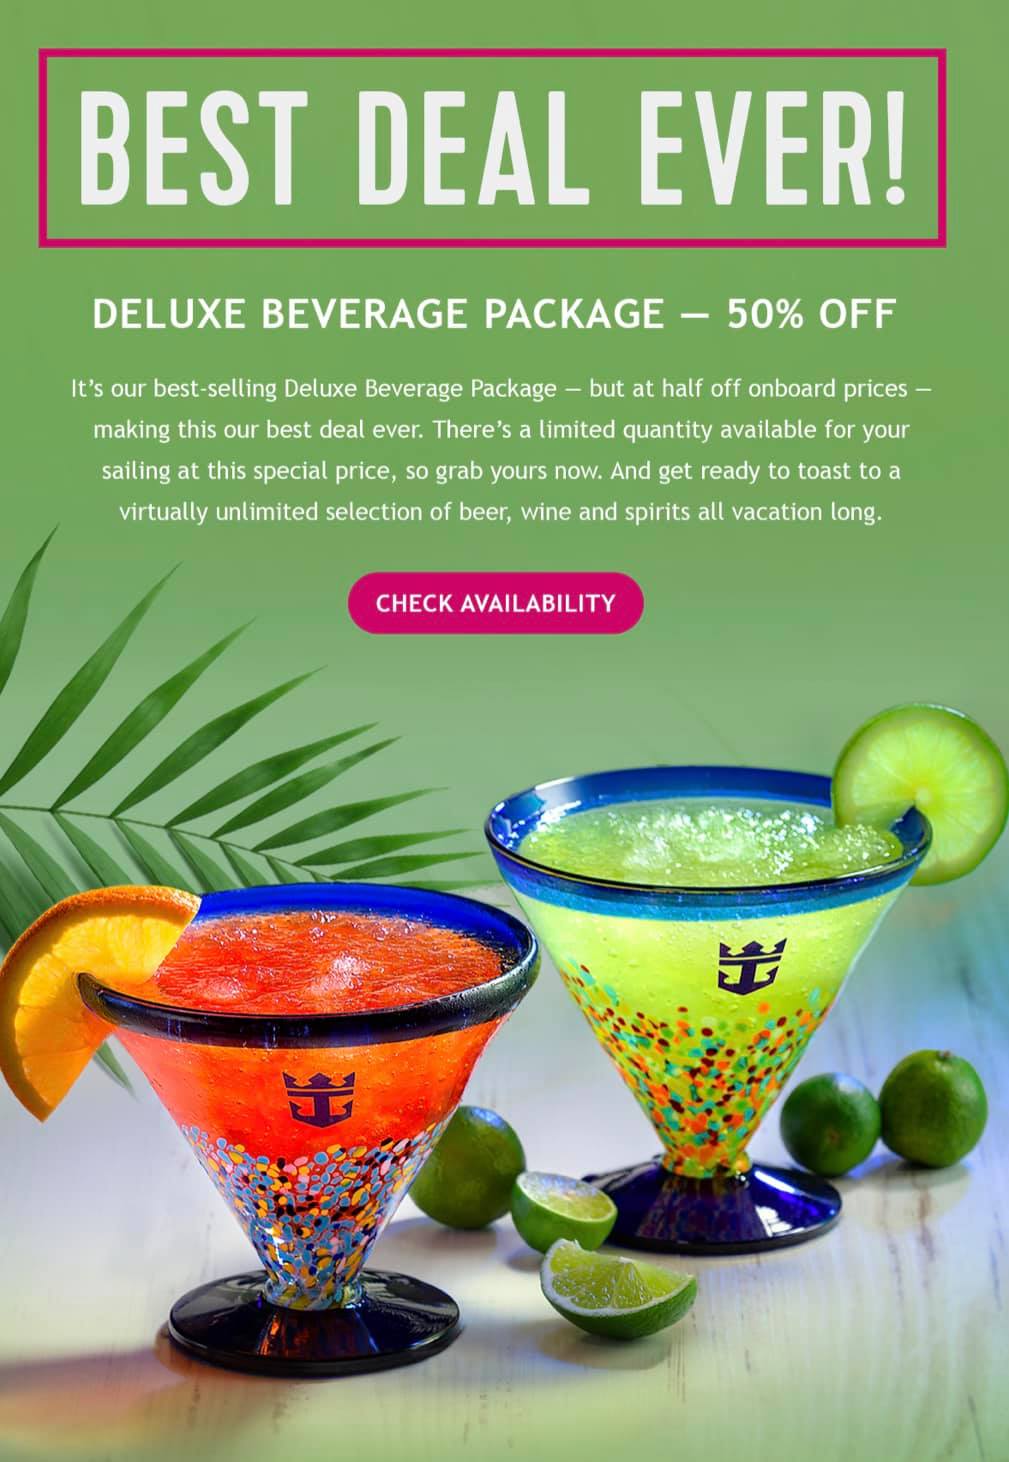 royal caribbean cruise drink package prices